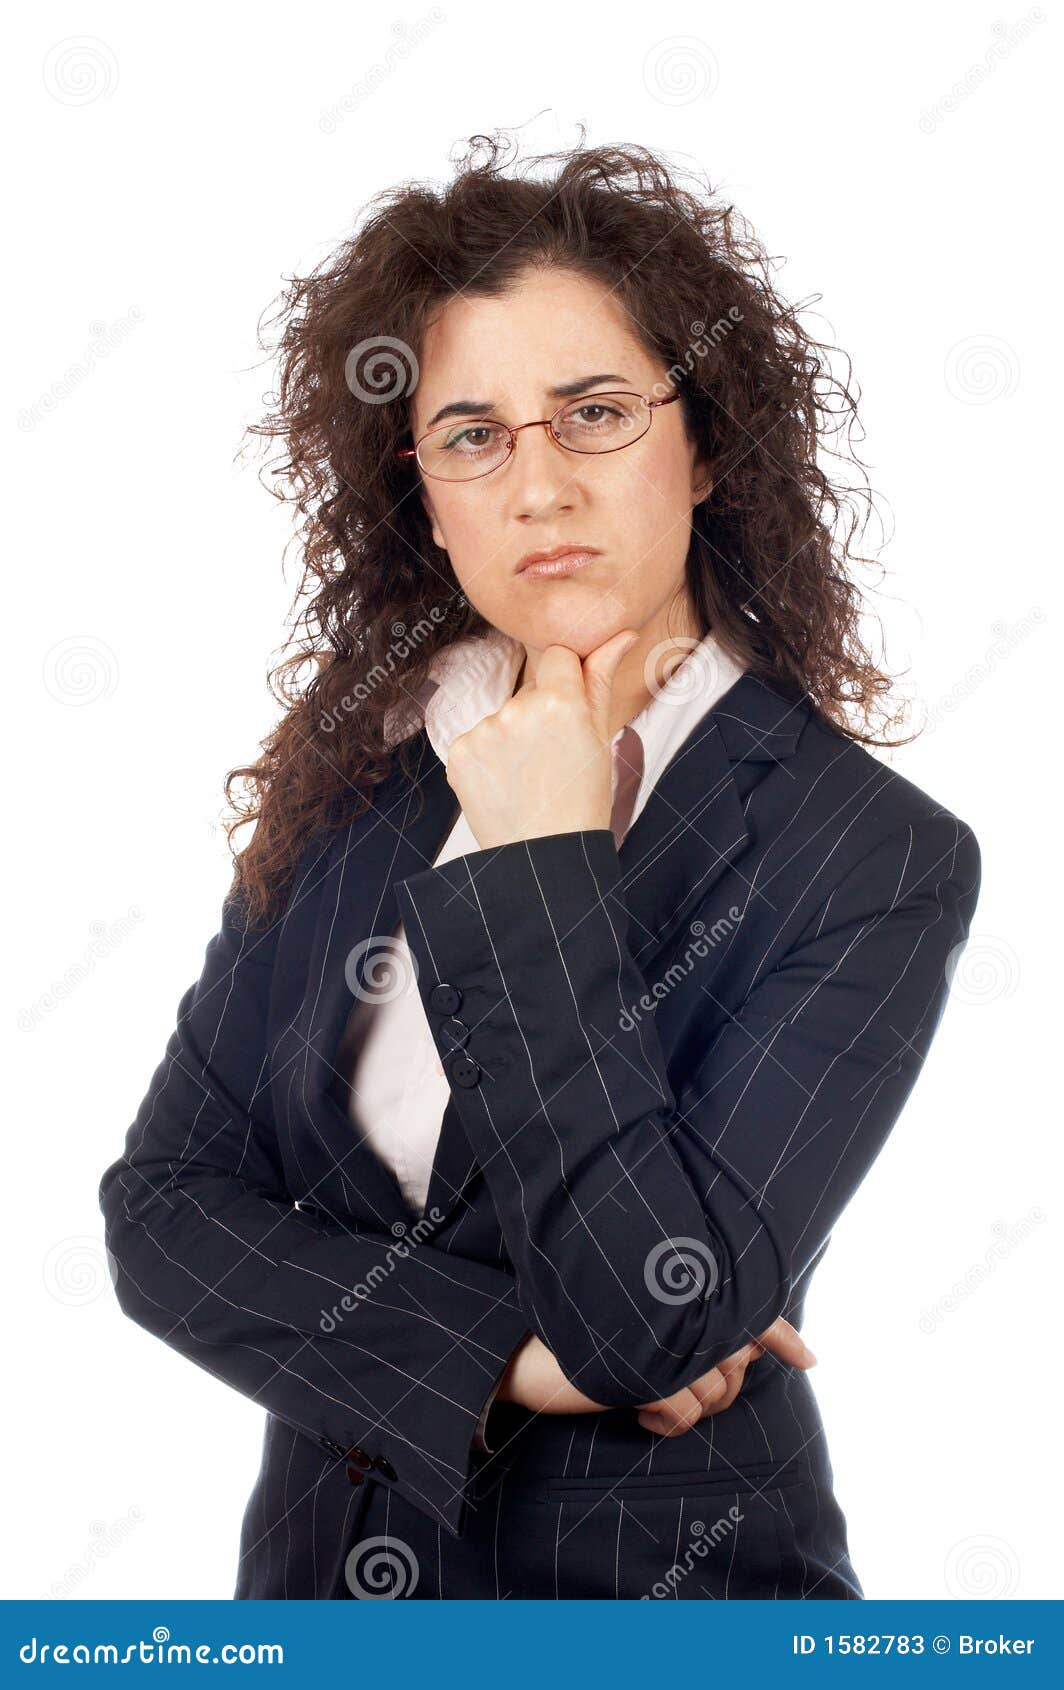 Worried Business Woman Stock Image Image Of Beauty Model 1582783